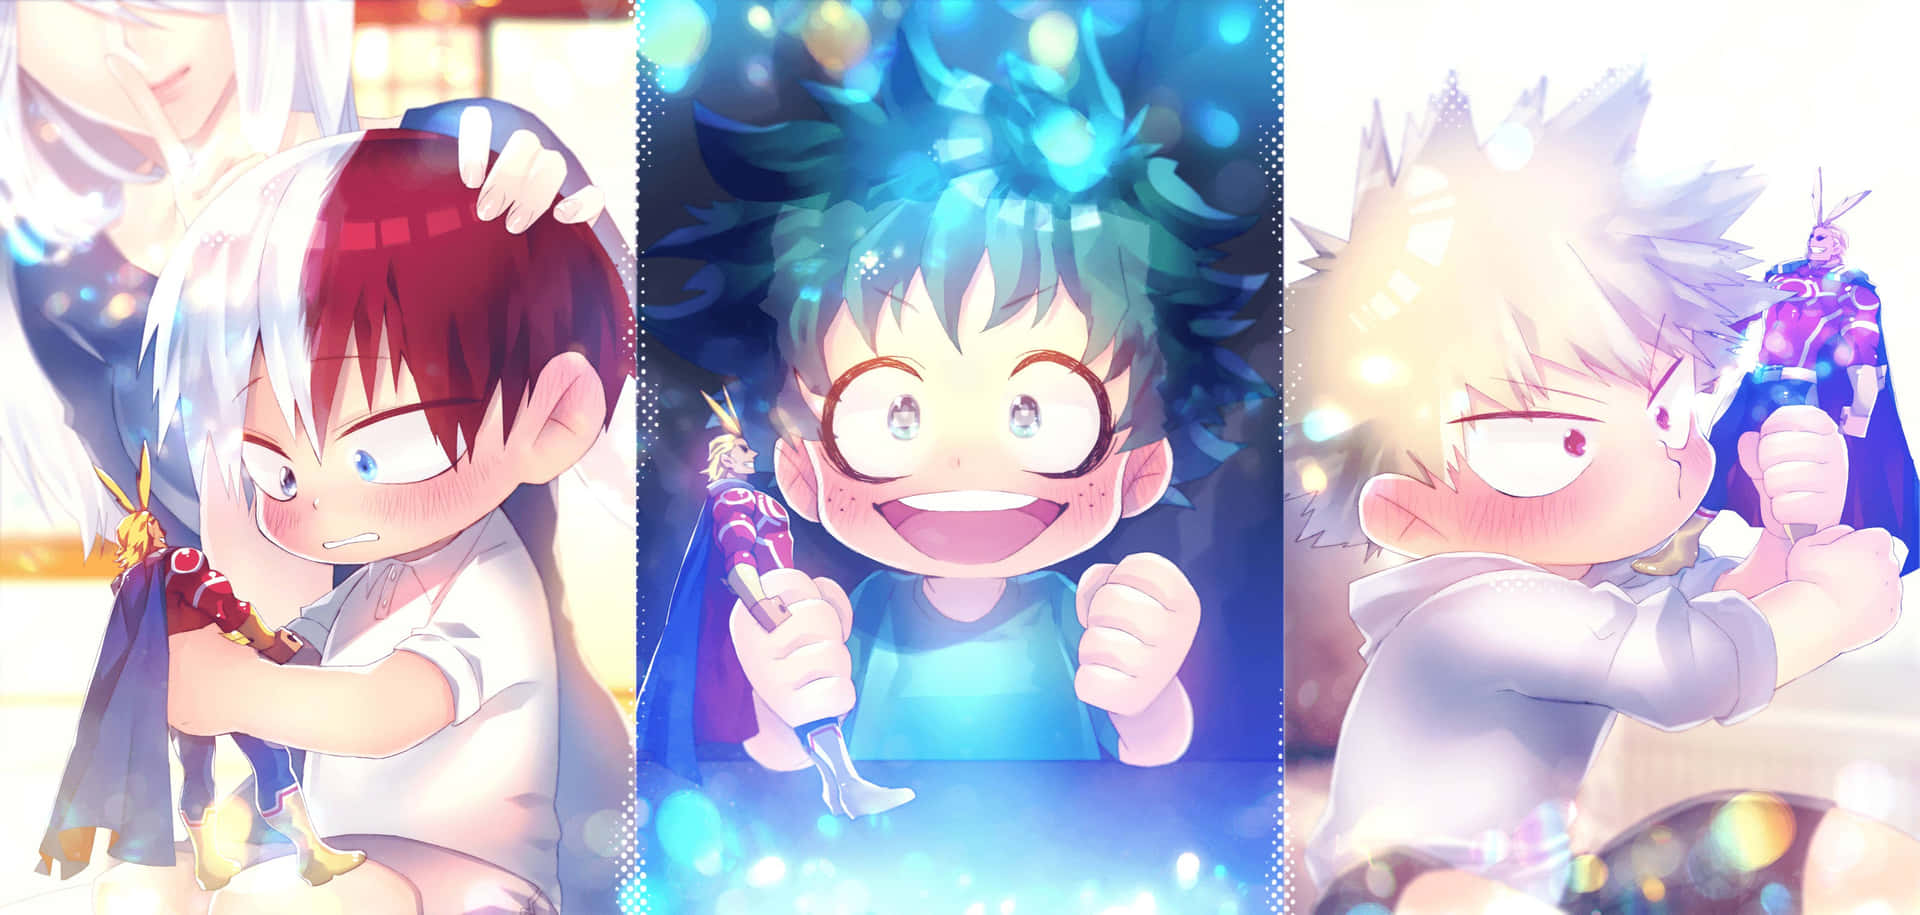 "Teamwork makes the dream work! Deku and Todoroki work together to save the day." Wallpaper